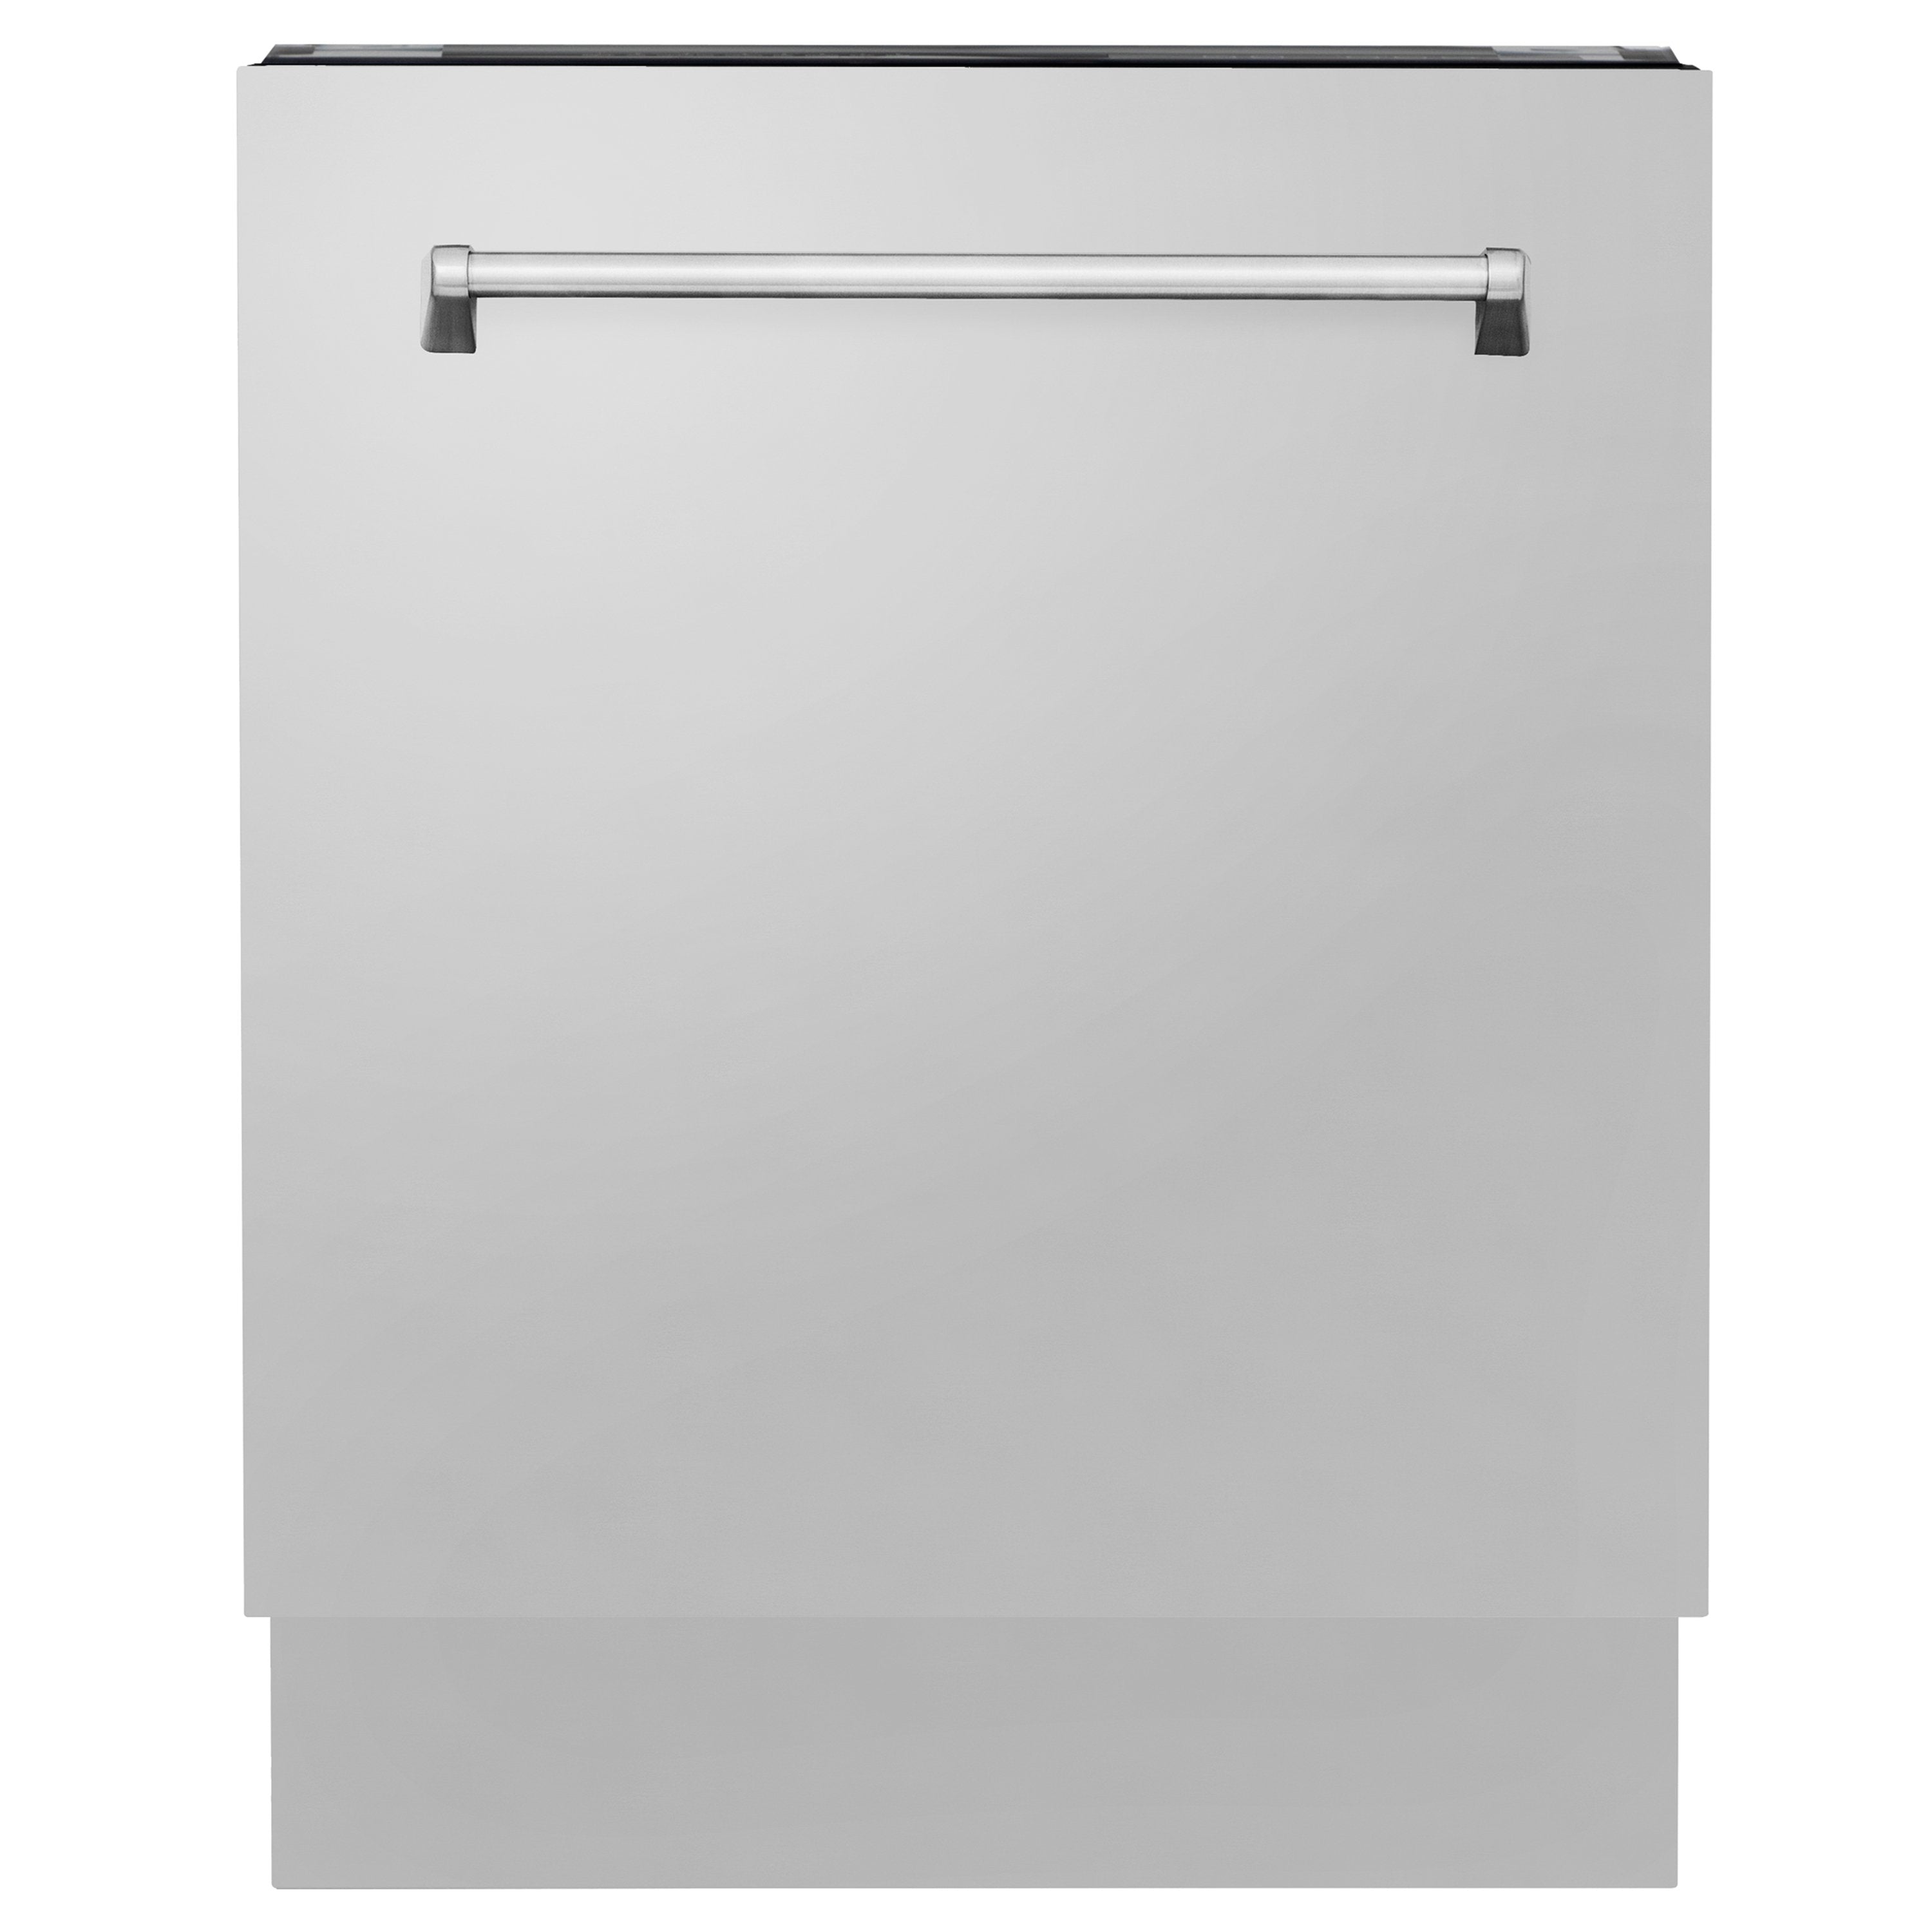 24" Top Control Tall Tub Dishwasher in Custom Panel Ready with Stainless Steel Tub and 3rd Rack (DWV-24)